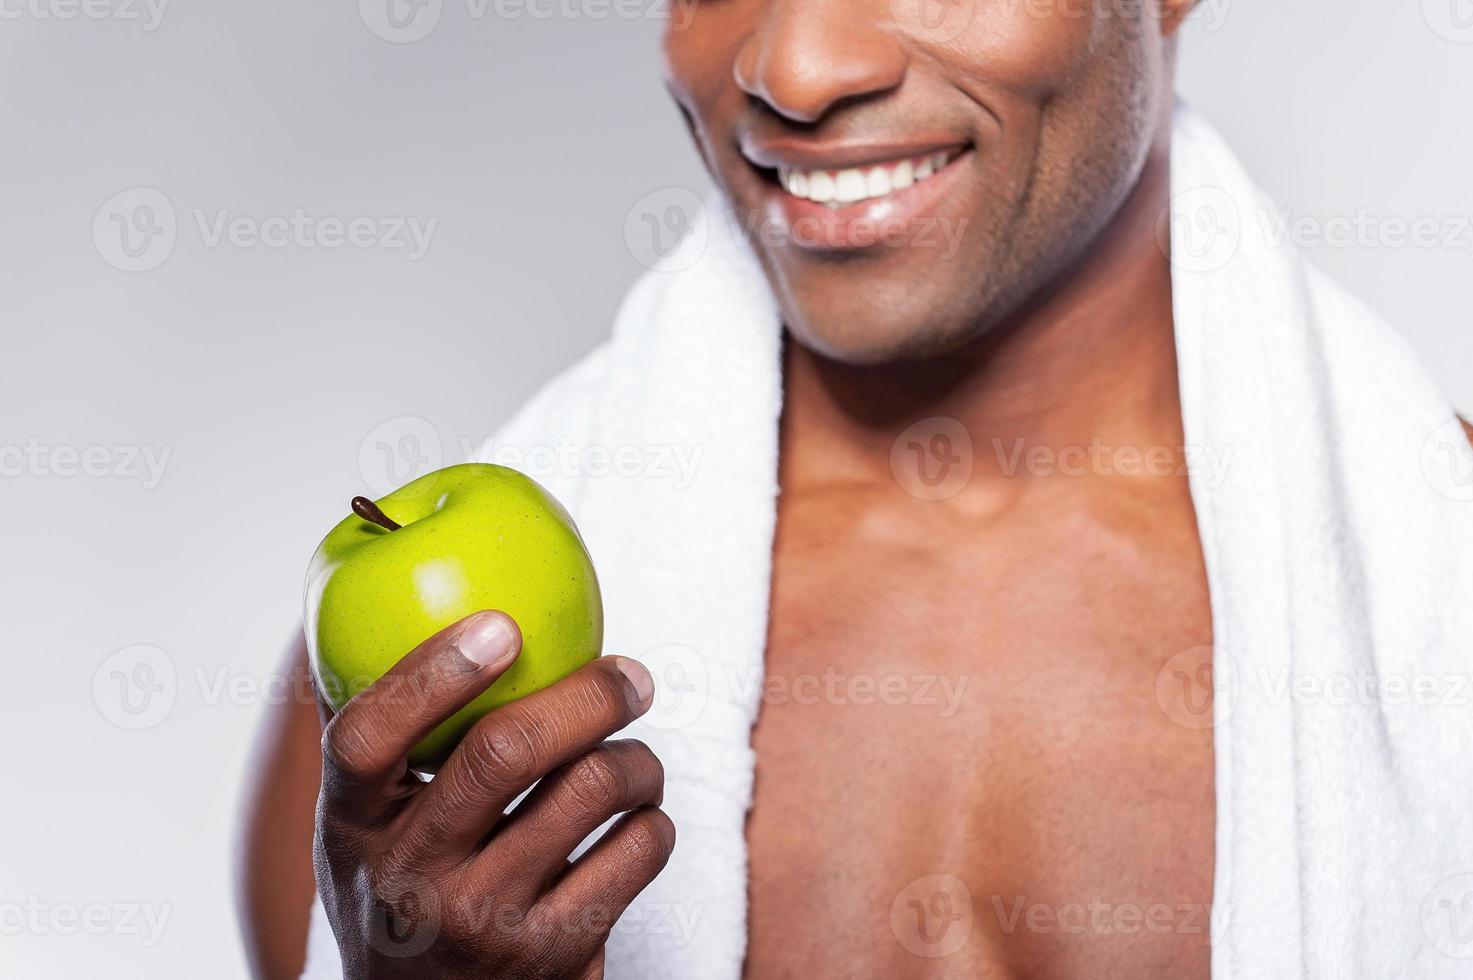 Man with green apple. Cropped image of young muscular African man with towel on shoulder throwing up an apple and smiling at camera while standing against grey background photo